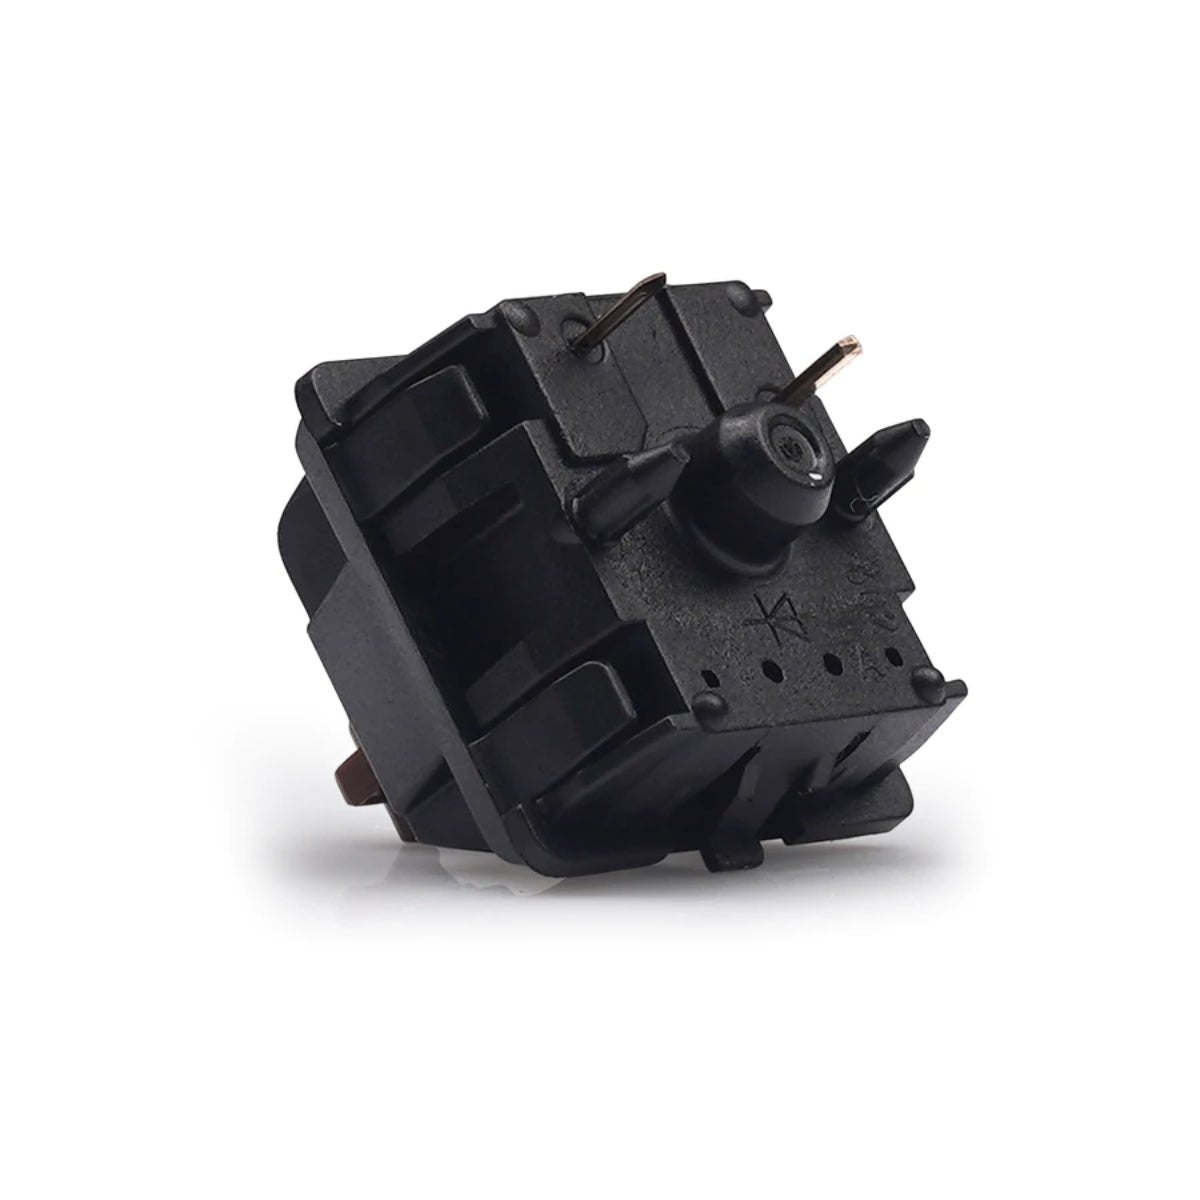 KBD Fans Cherry MX Hyperglide Tactile Switches - Brown - Store 974 | ستور ٩٧٤